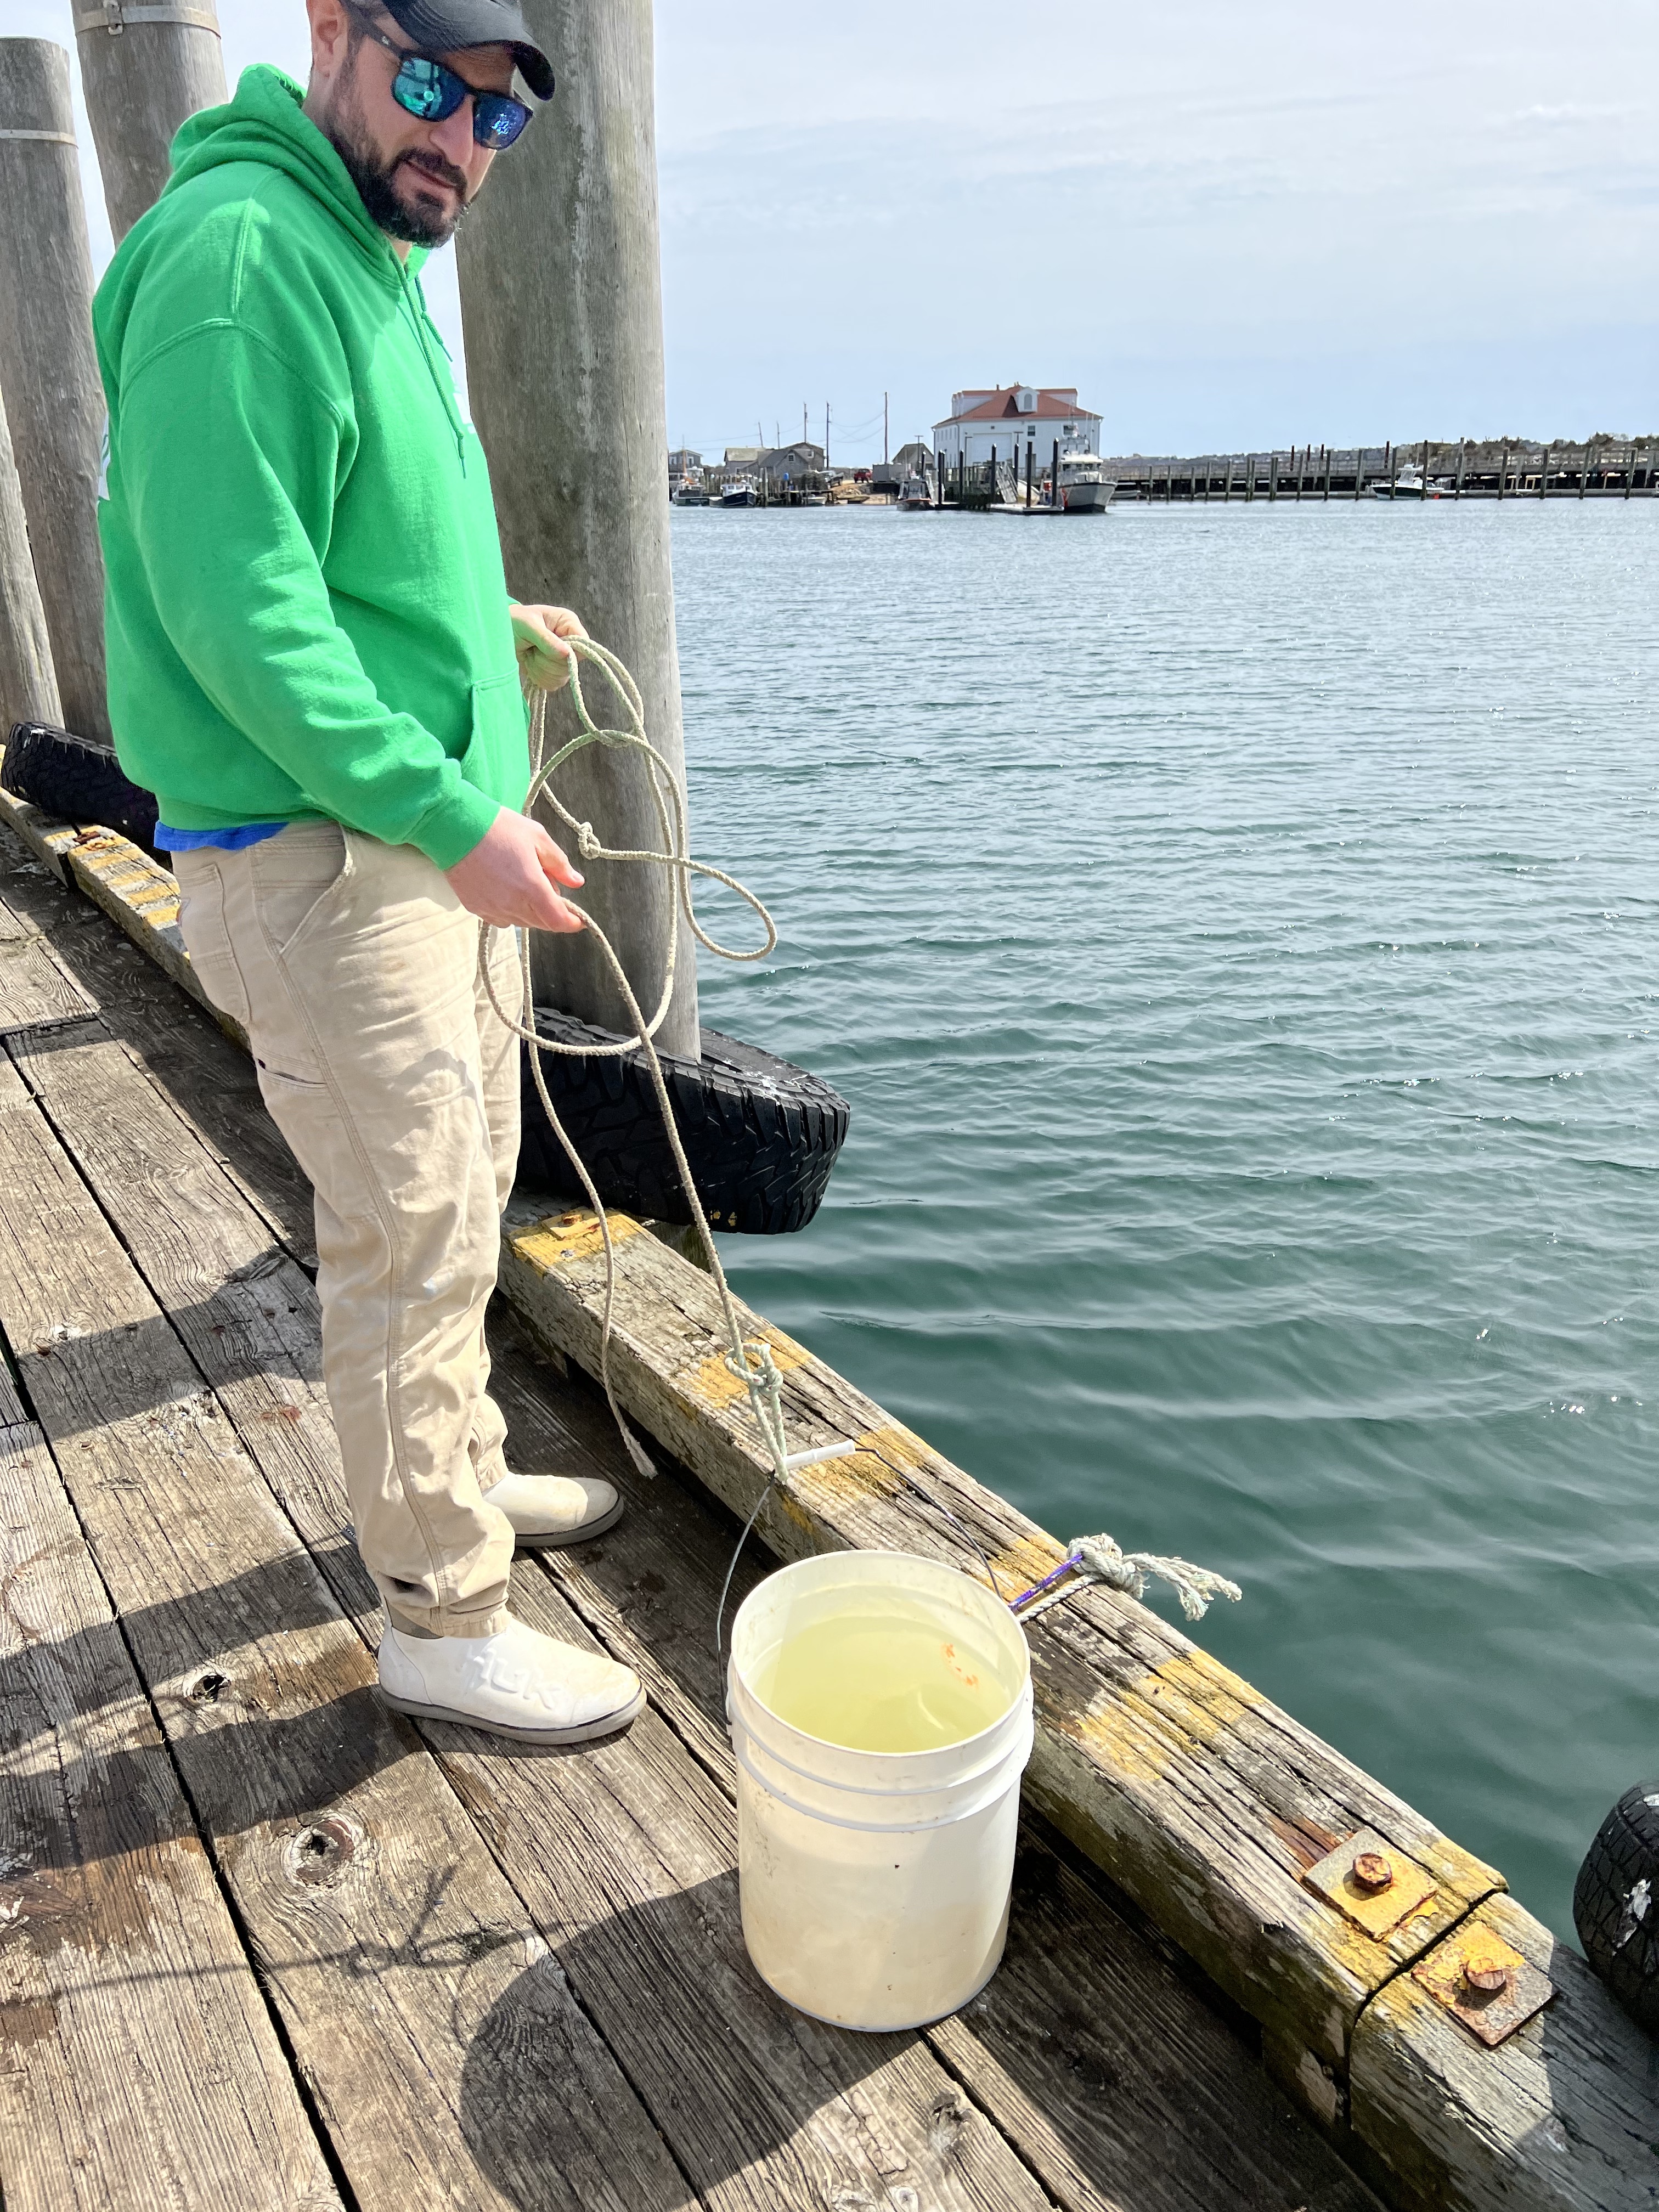 Peter Lambos collects water from Menemsha Harbor where Fred Littleton was Harbor Master.